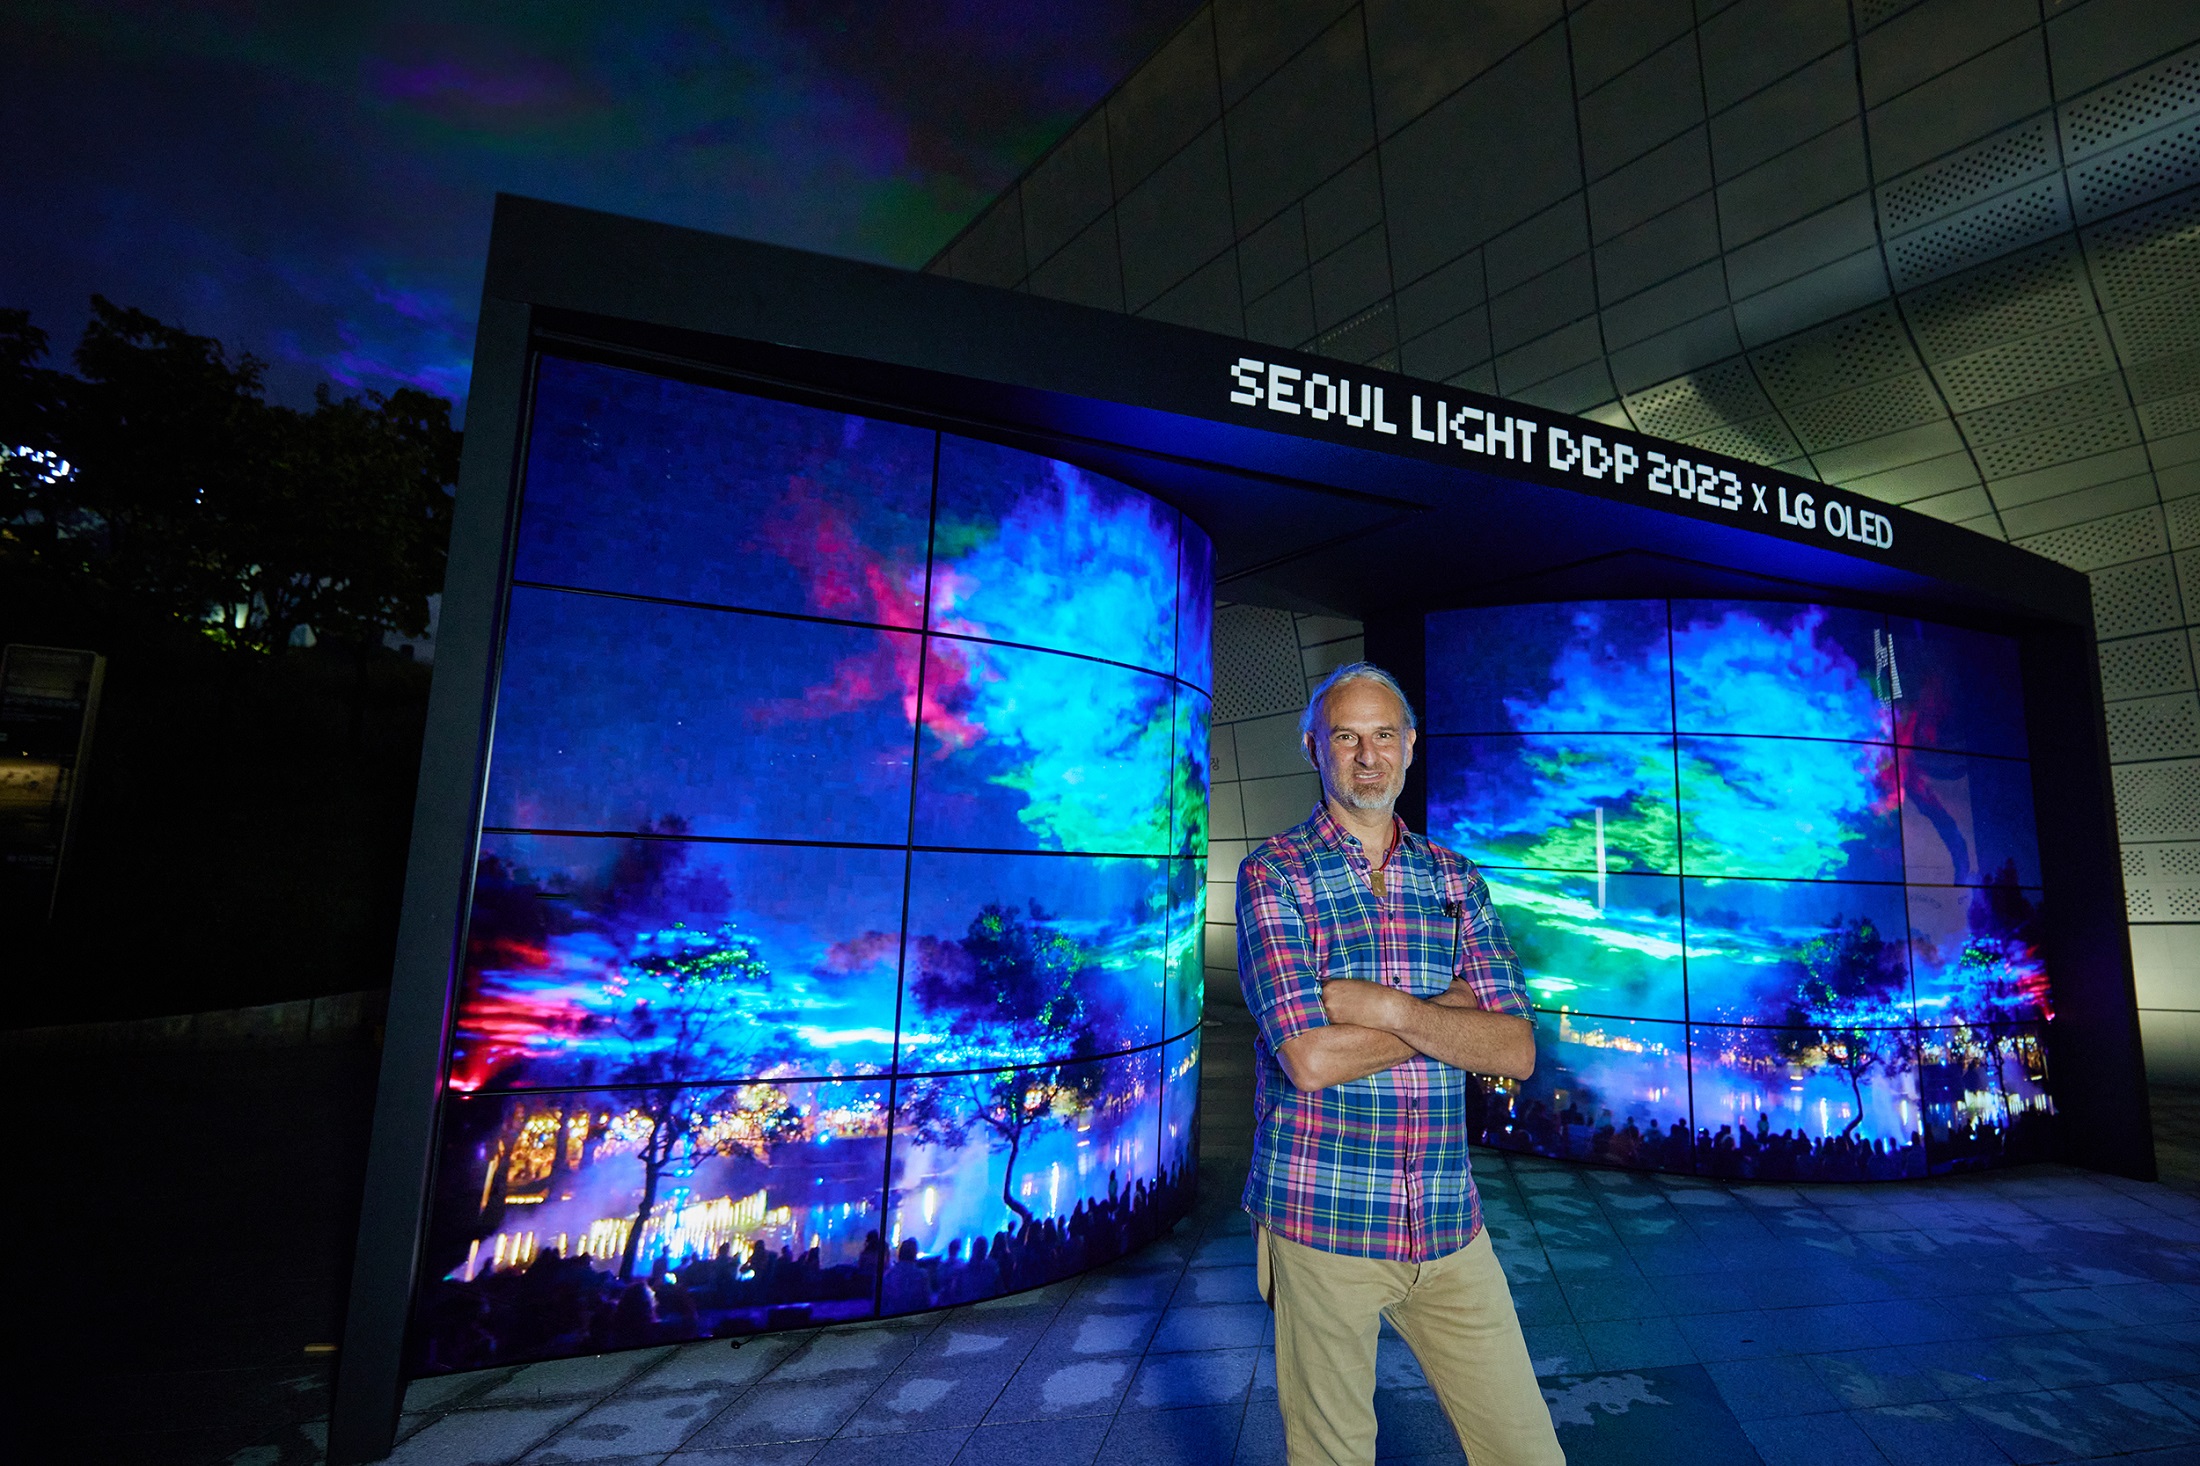 Artist Dan Archer standing in front of the Seoul Light DDP 2023 with numerous panels displaying his vibrant artwork